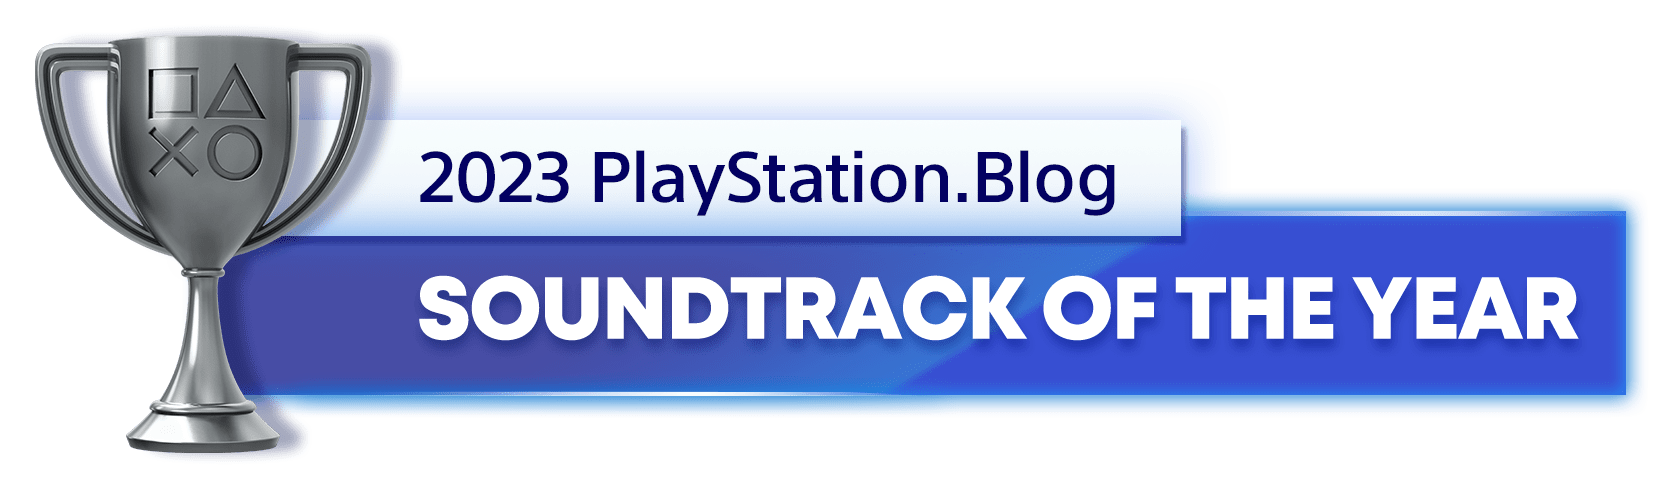 Silver Trophy for the 2023 PlayStation Blog Soundtrack of the Year Winner